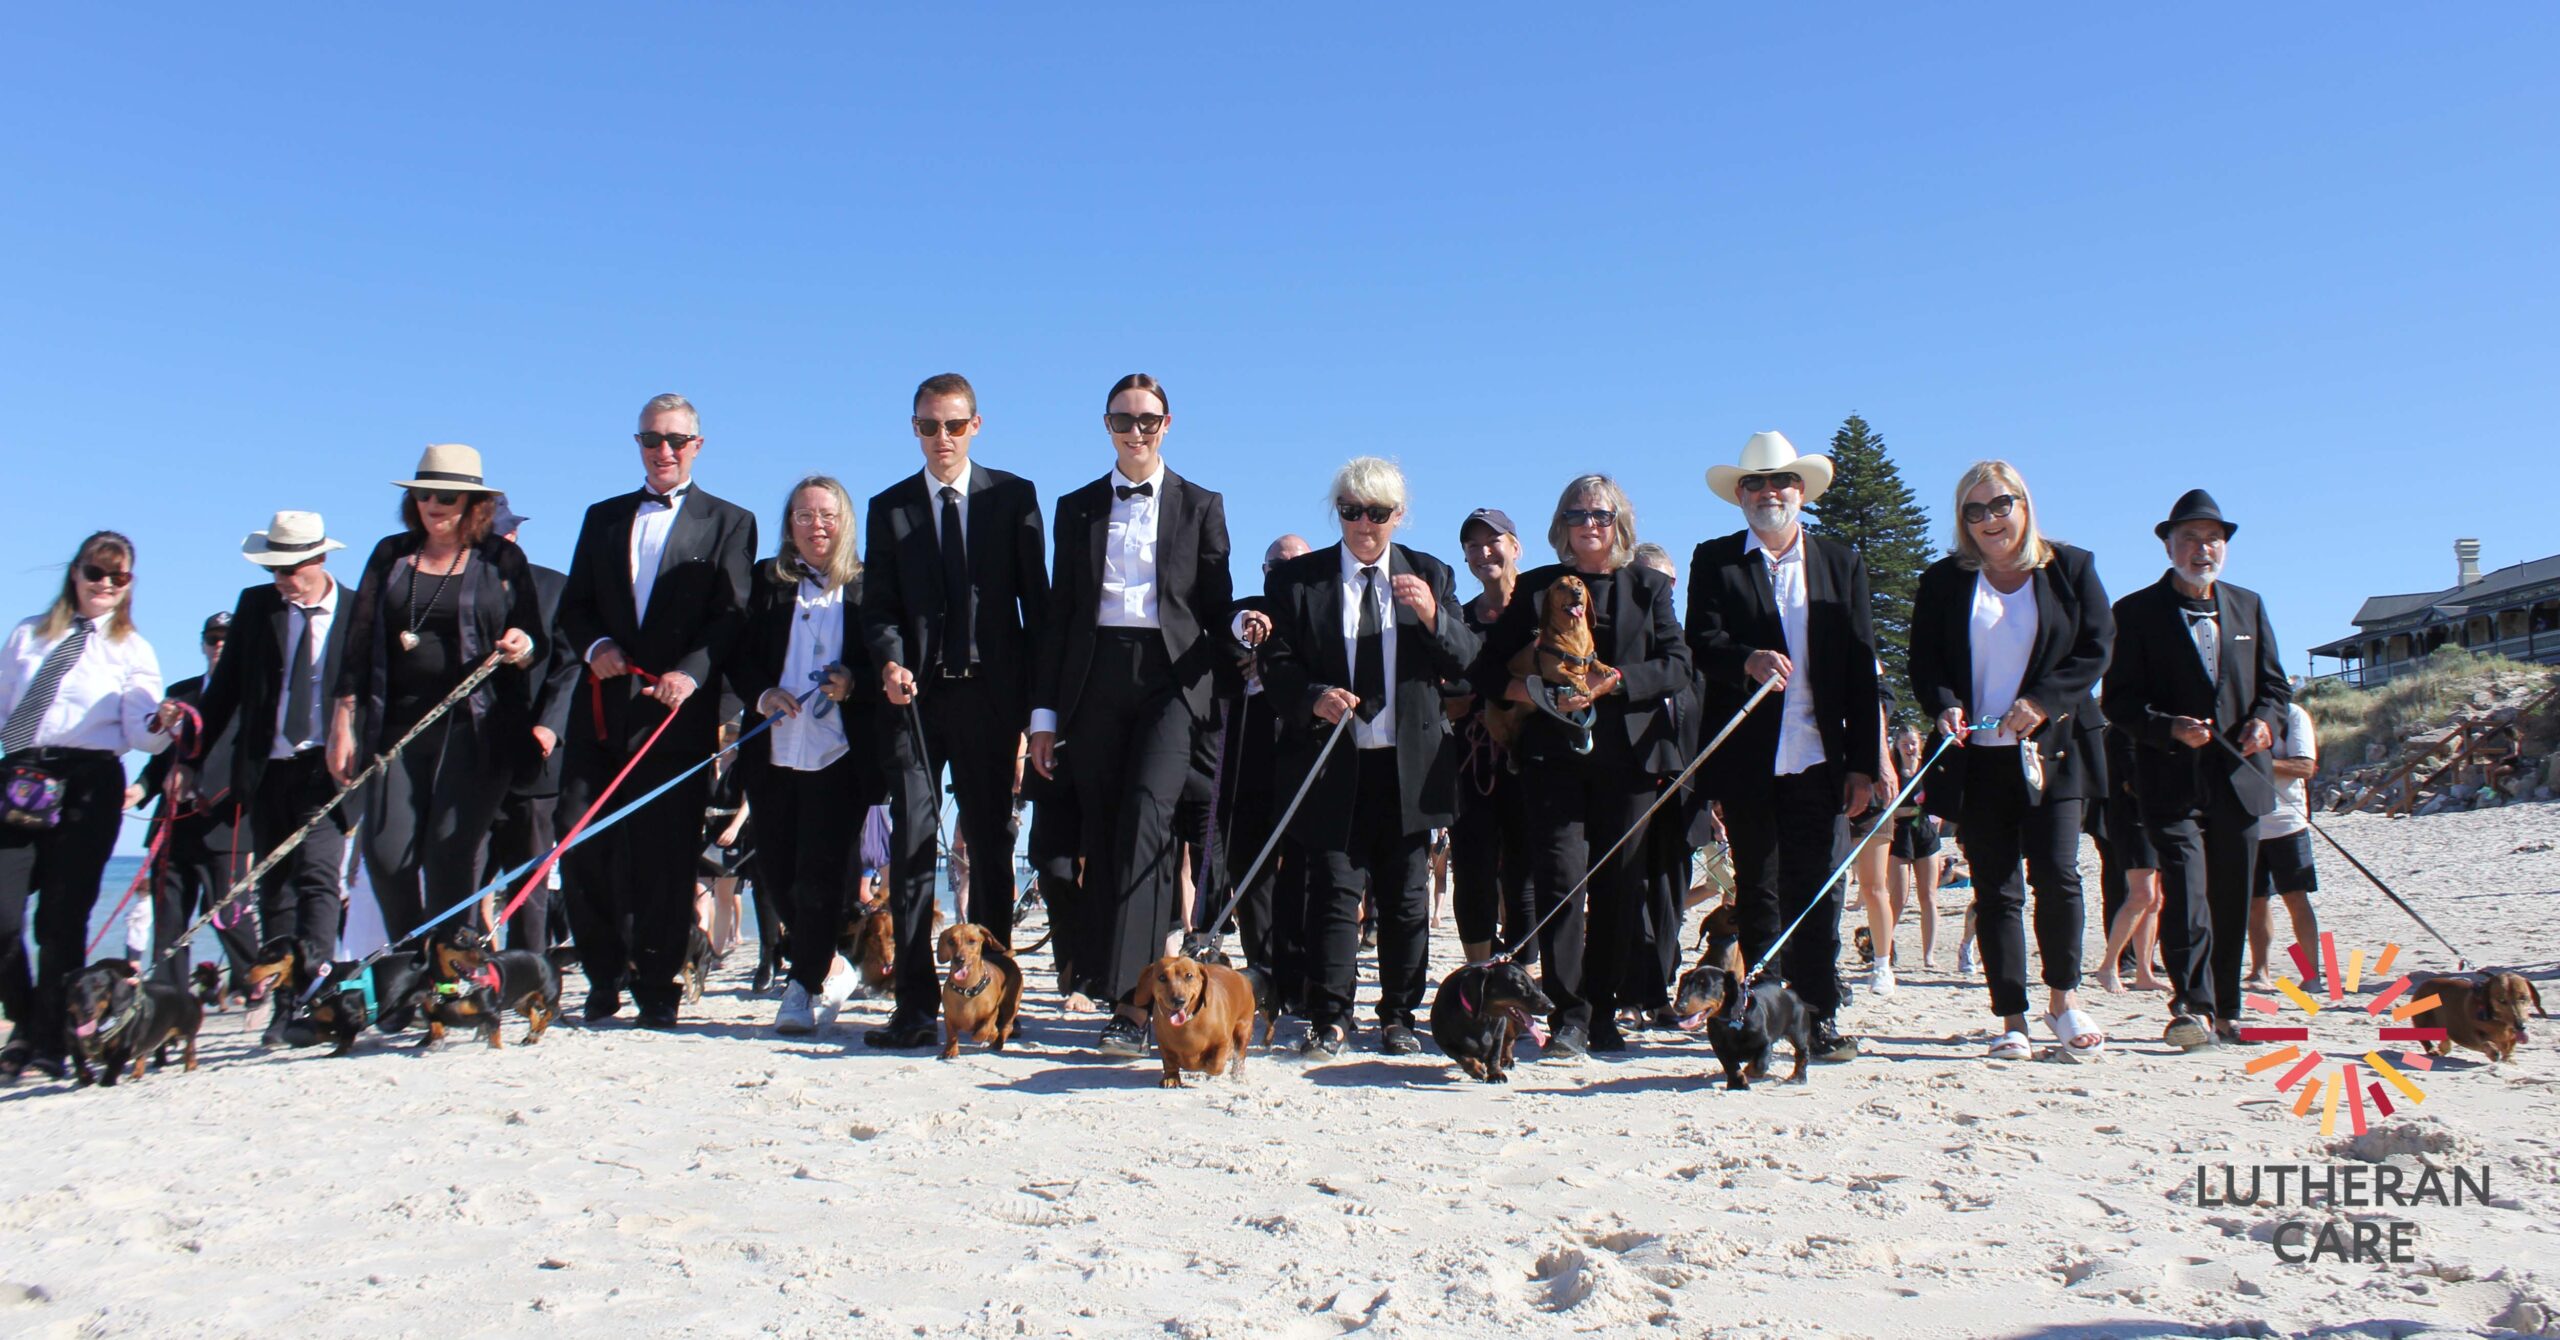 A large group of humans dressed in formal suits or all black, walking happy sausage dogs on leads on white sand, toward the camera. The Lutheran Care logo appears in the bottom right hand corner.